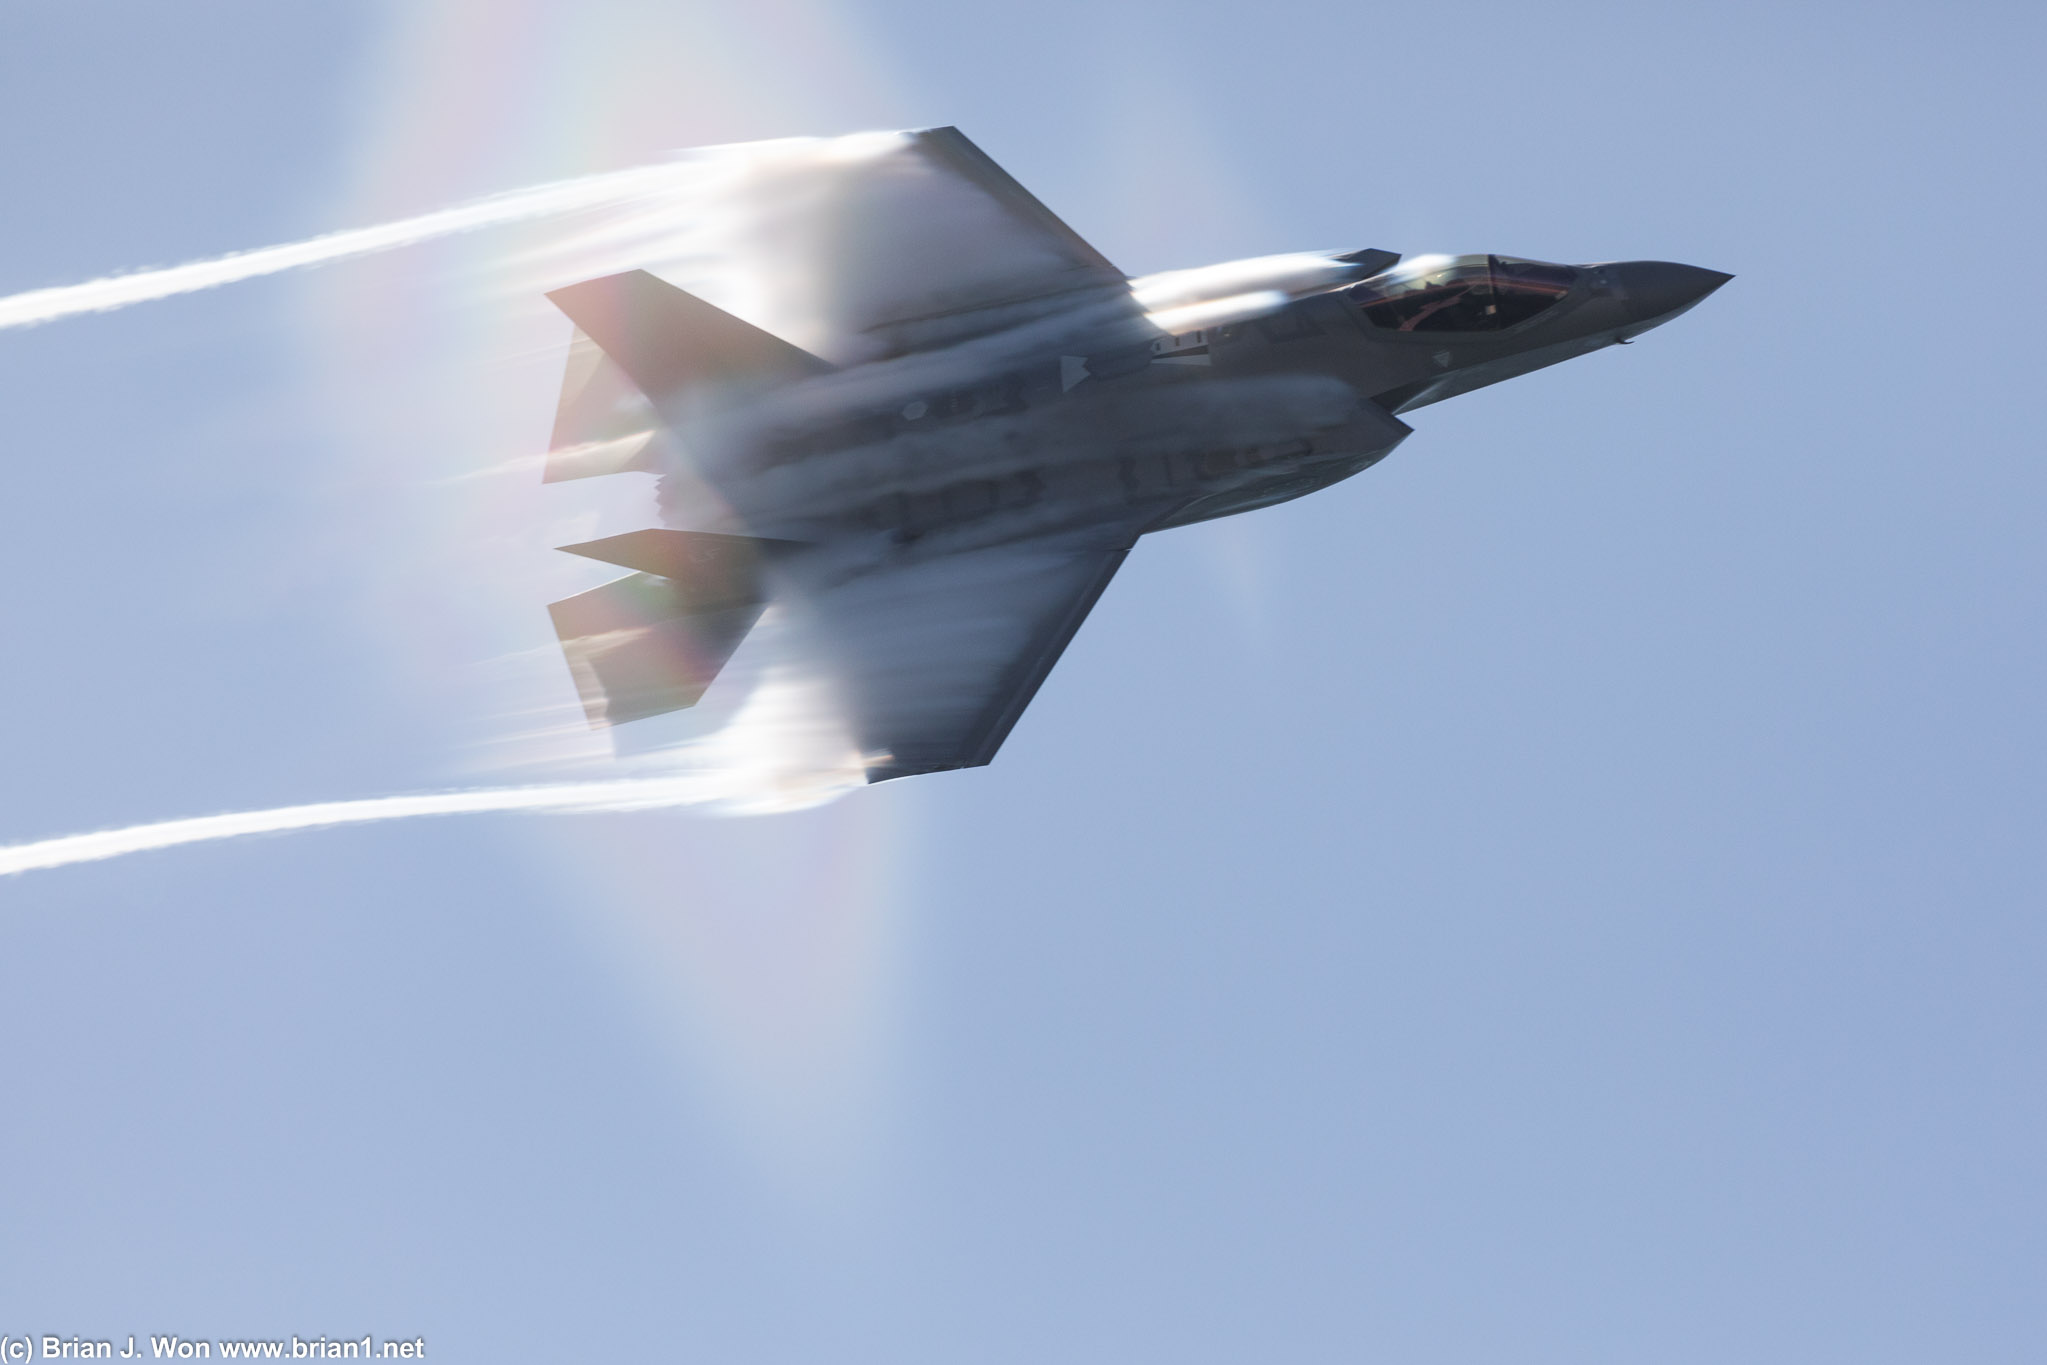 F-35A punching through its vapor cone at transonic speed.